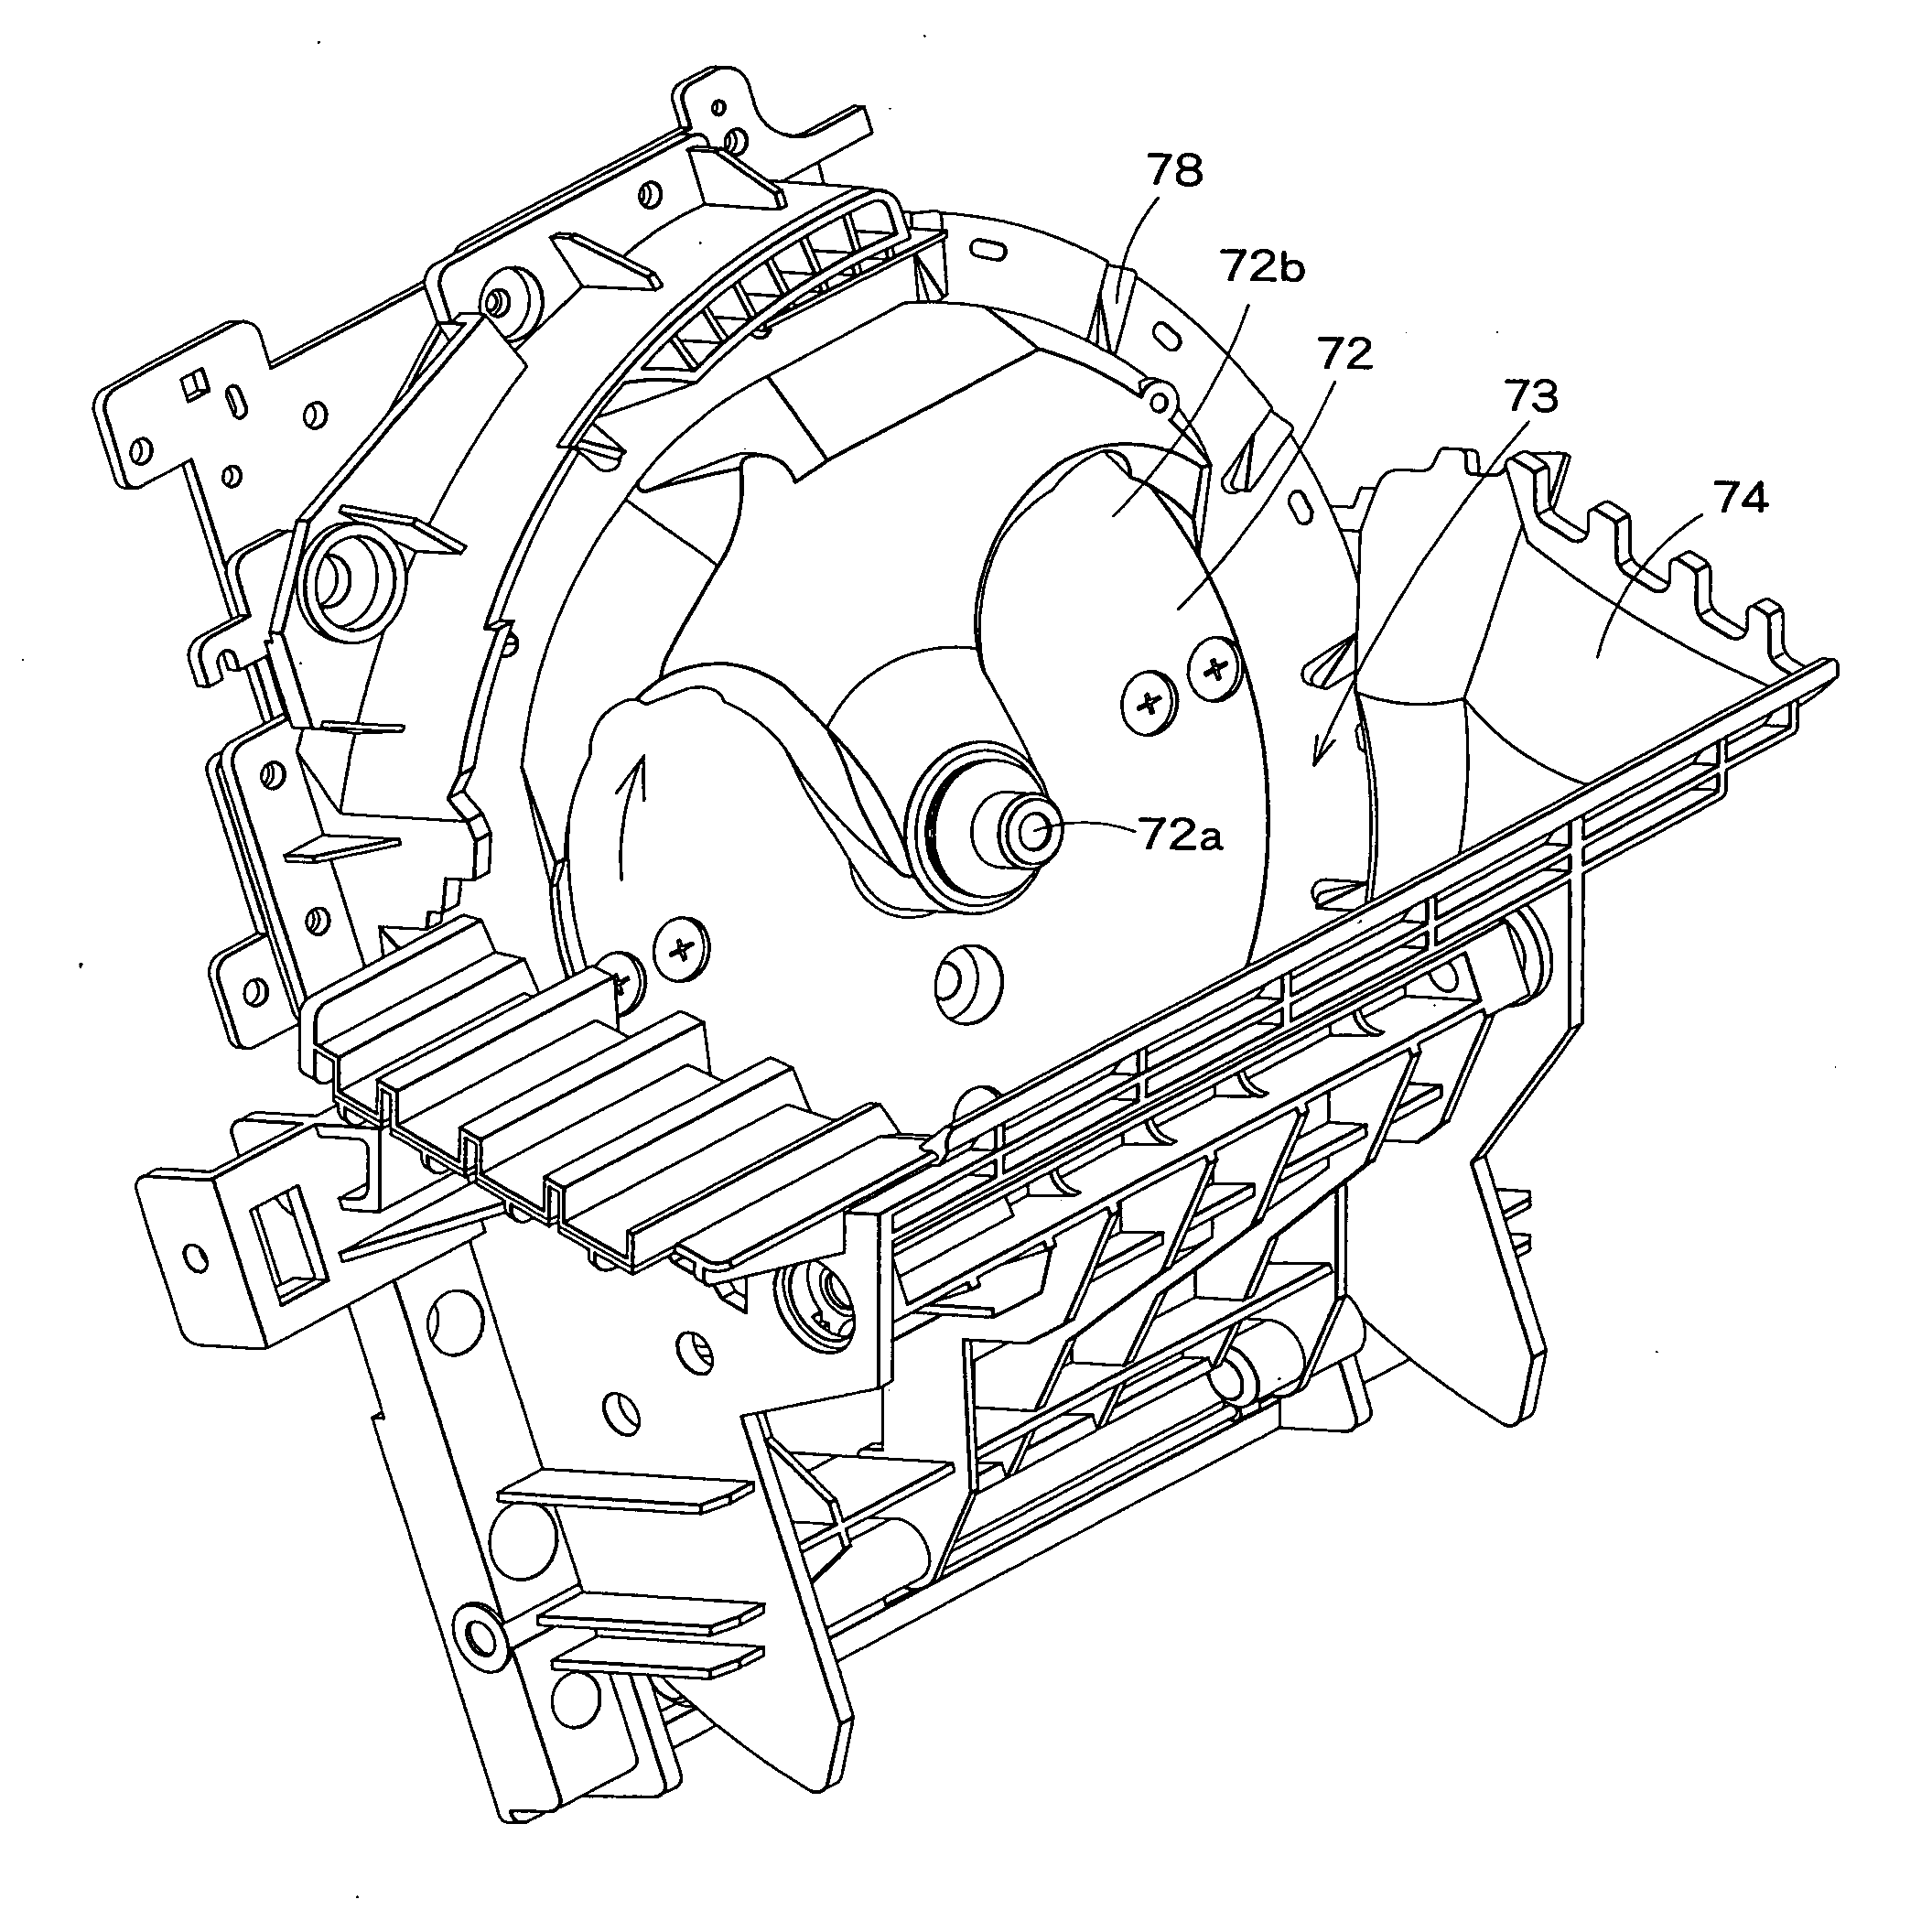 Coin feeding device and coin handling machine